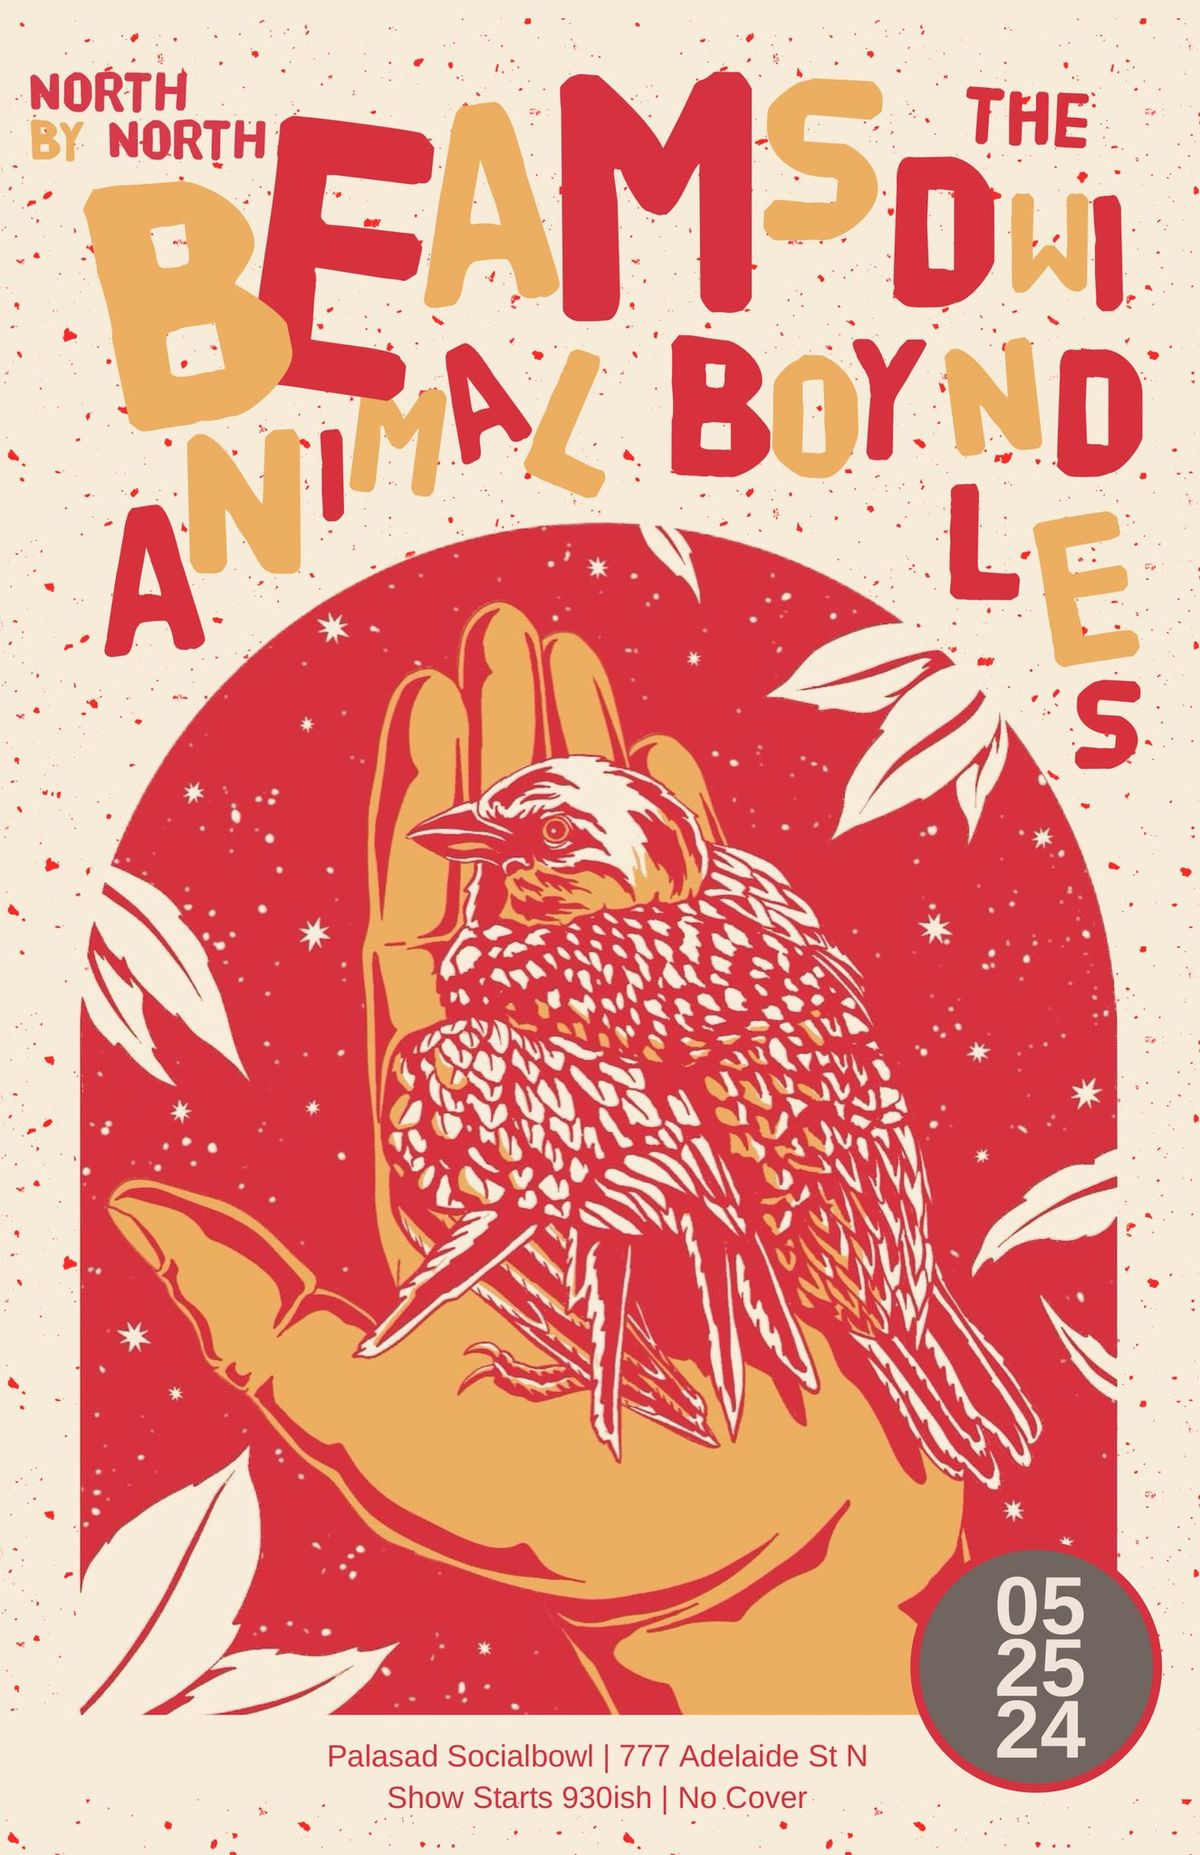 Beams w\/ Animal Boy, North By North and The Dwindles